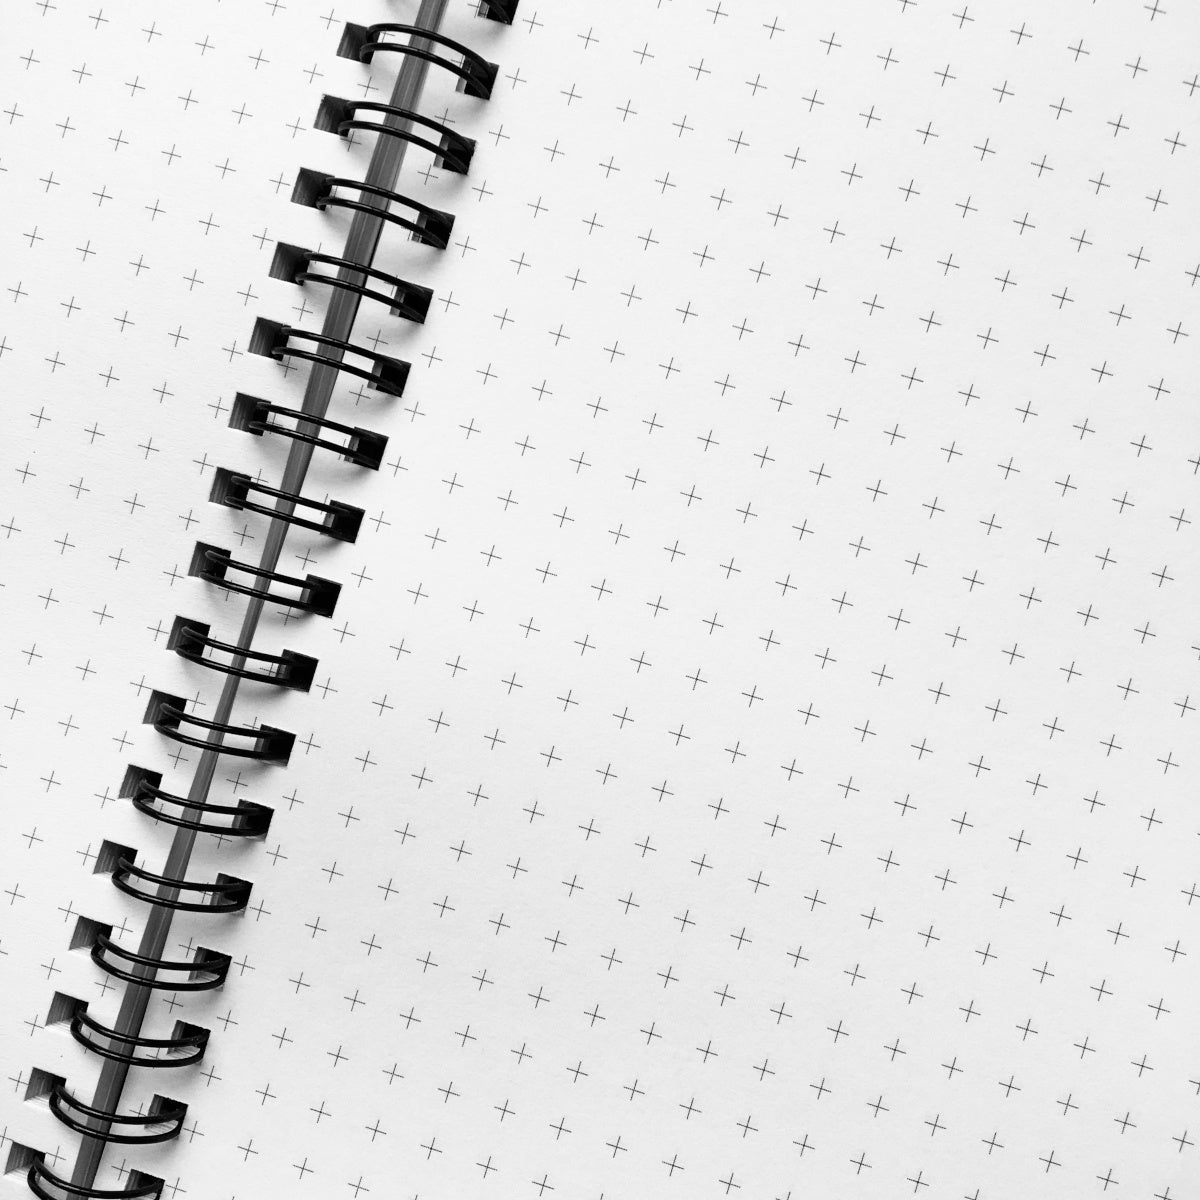 A close up picture of the grid graph paper option, showing the spiral binding and the little crosses printed on the white paper